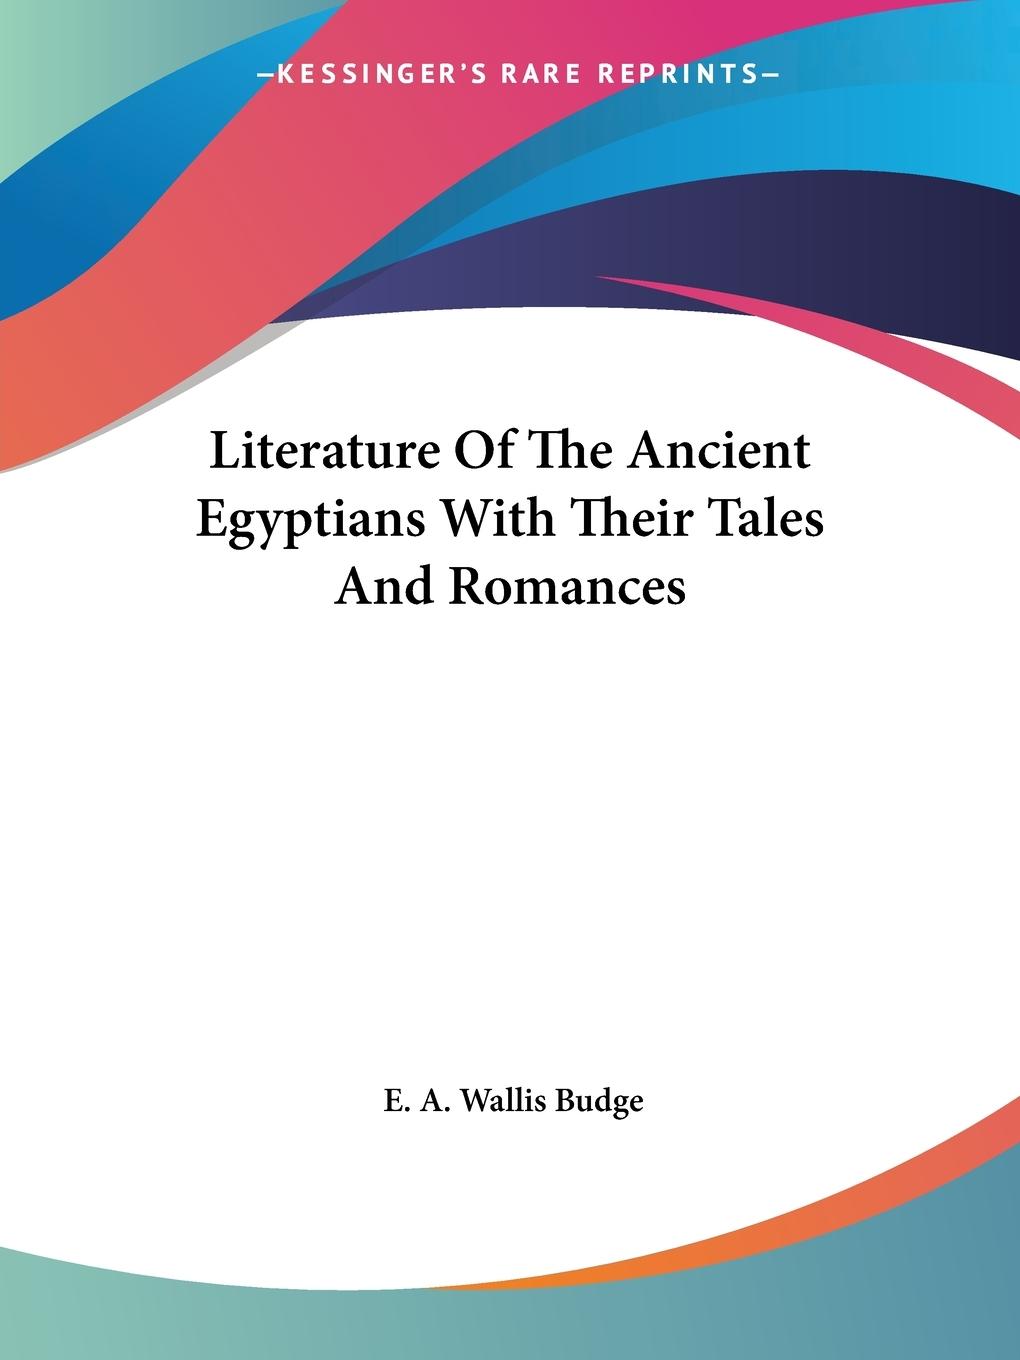 Literature Of The Ancient Egyptians With Their Tales And Romances - Budge, E. A. Wallis